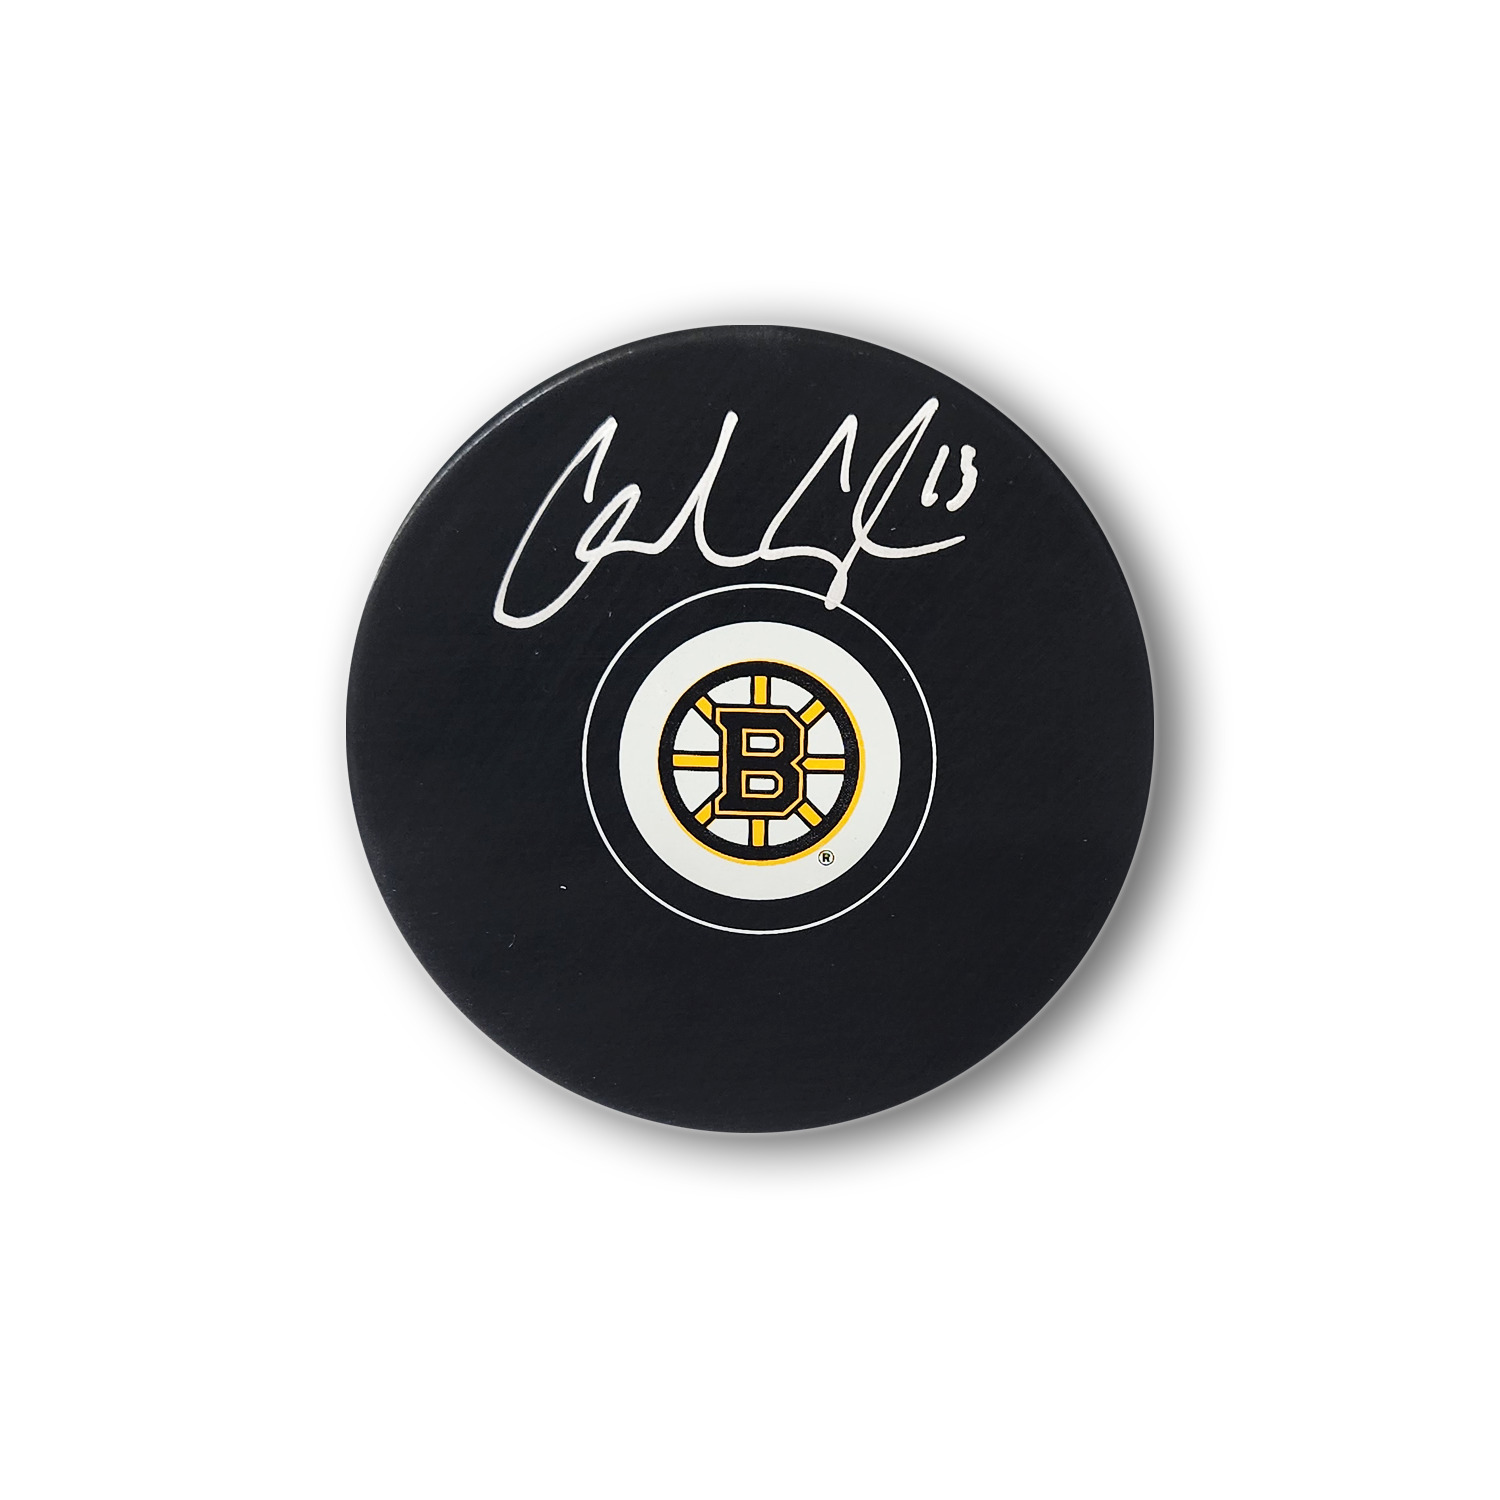 Charlie Coyle Autographed Boston Bruins Hockey Puck